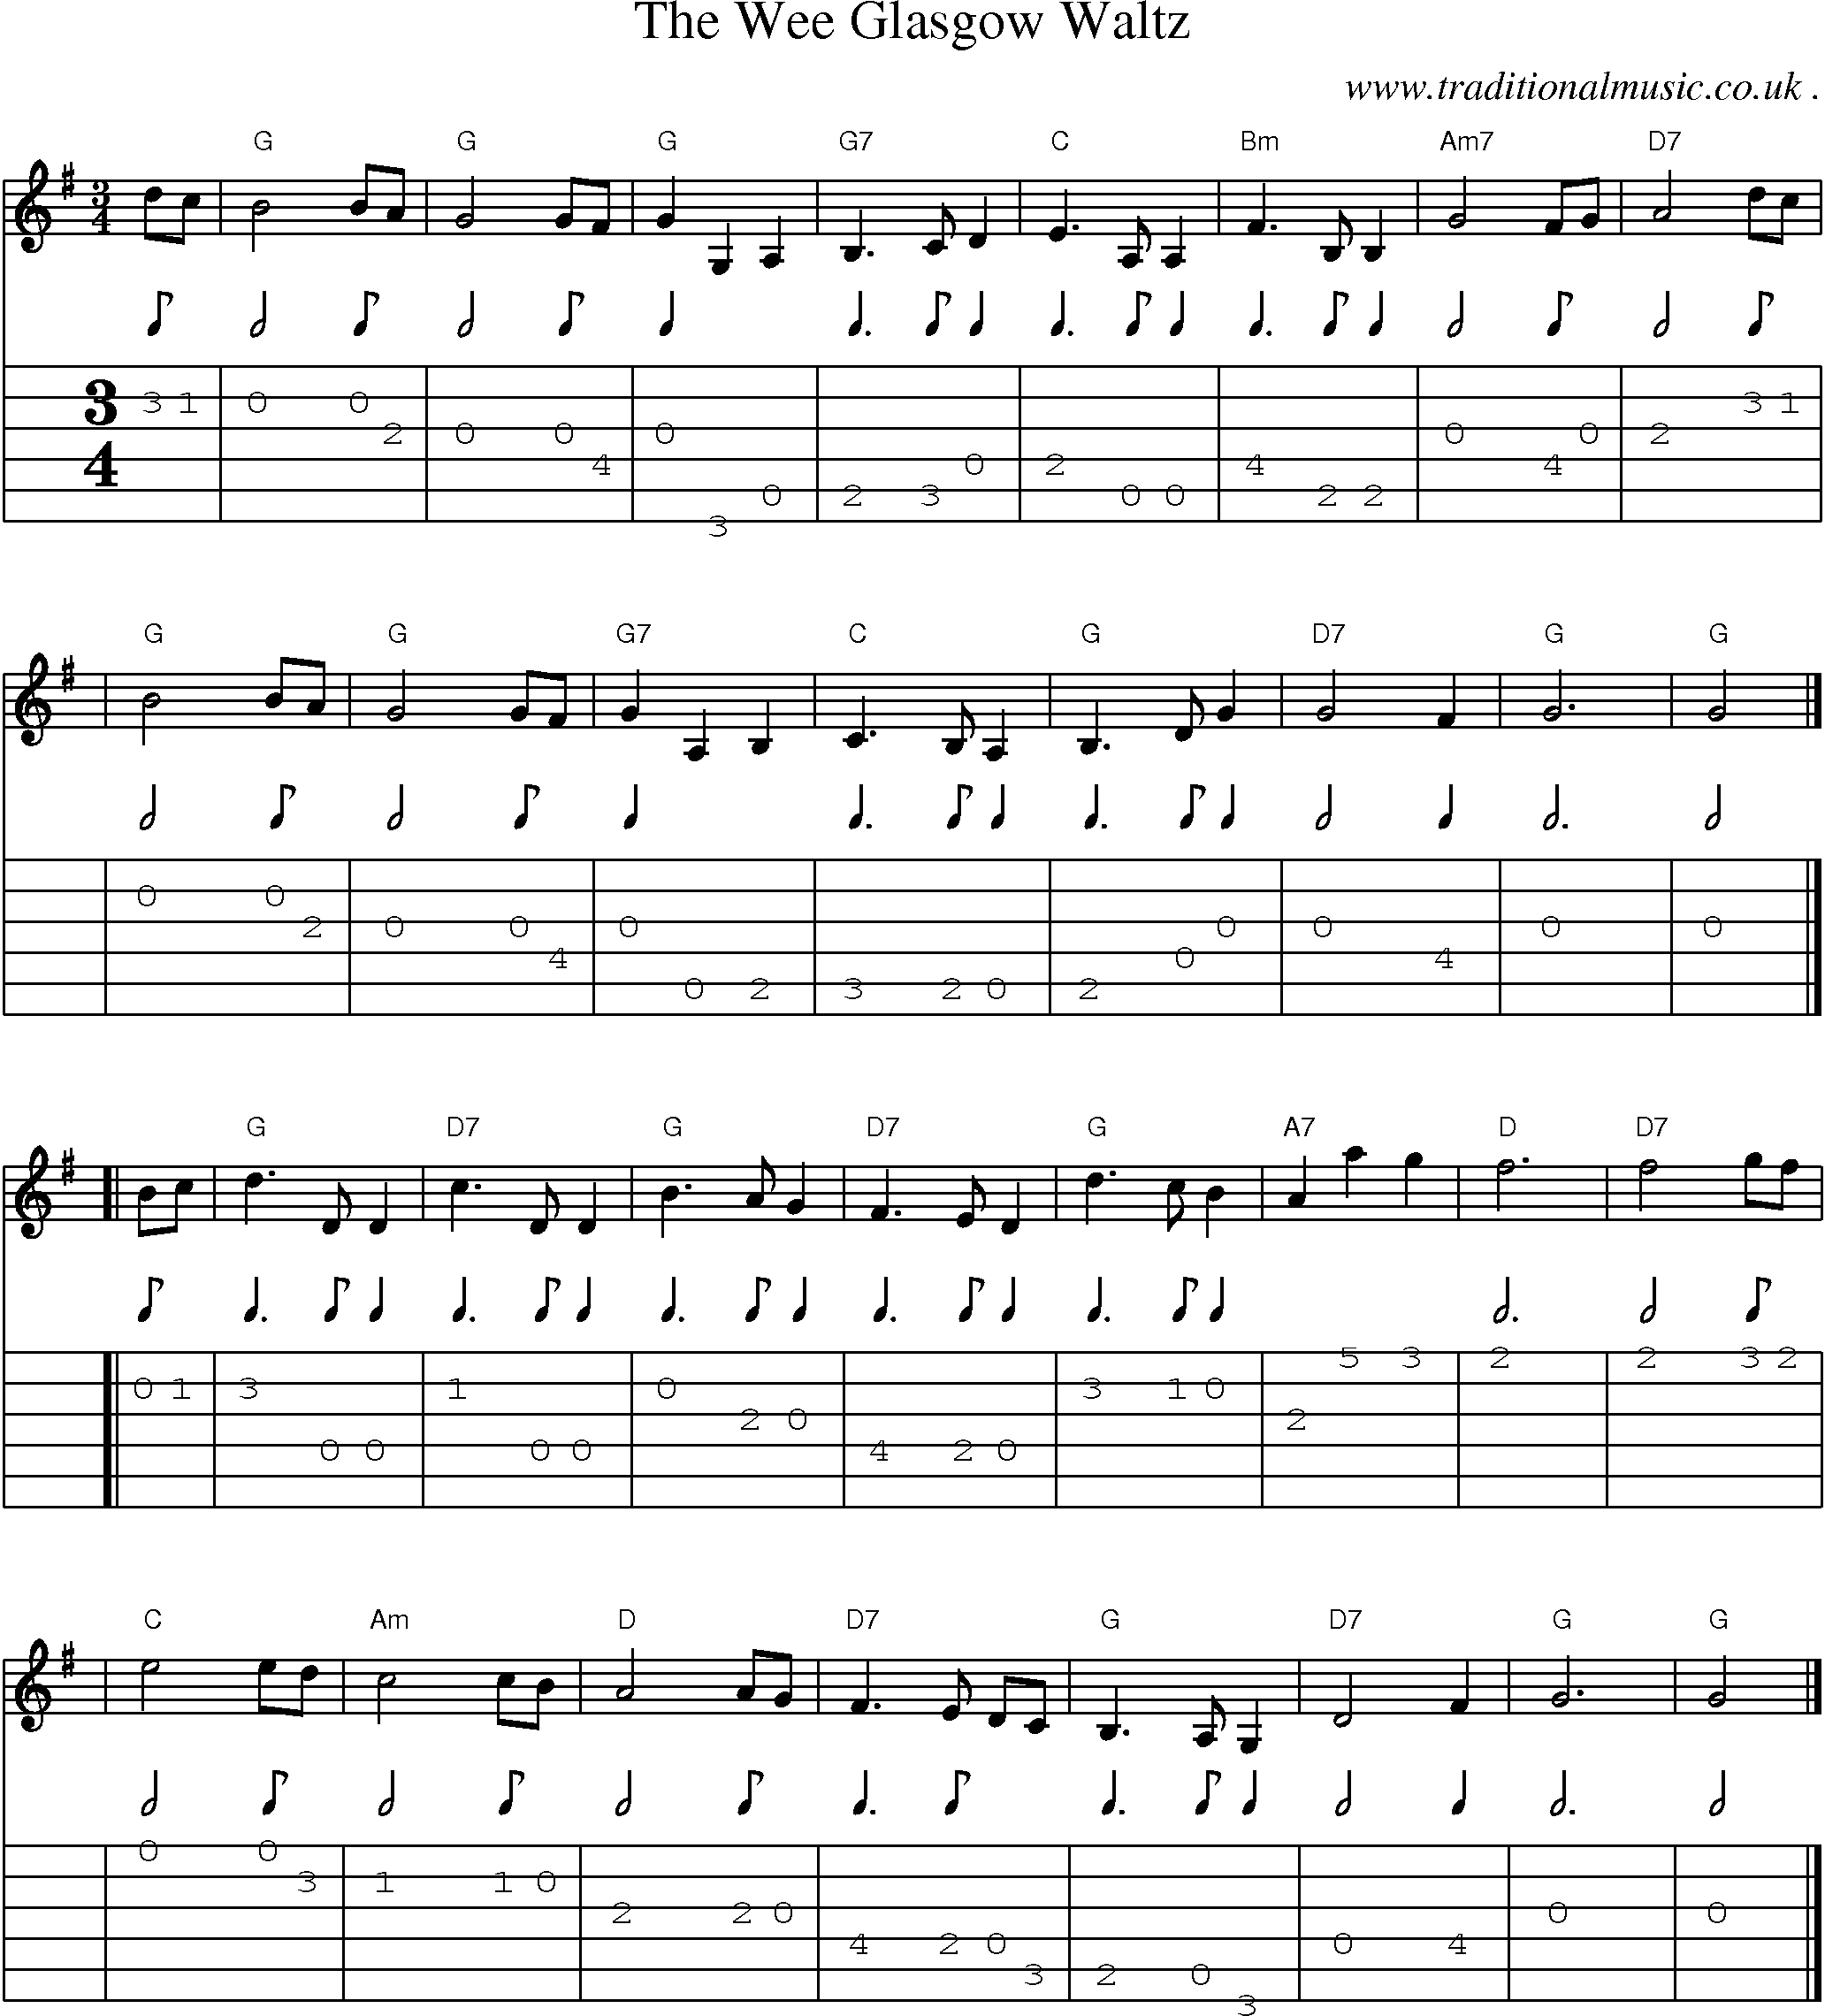 Sheet-music  score, Chords and Guitar Tabs for The Wee Glasgow Waltz